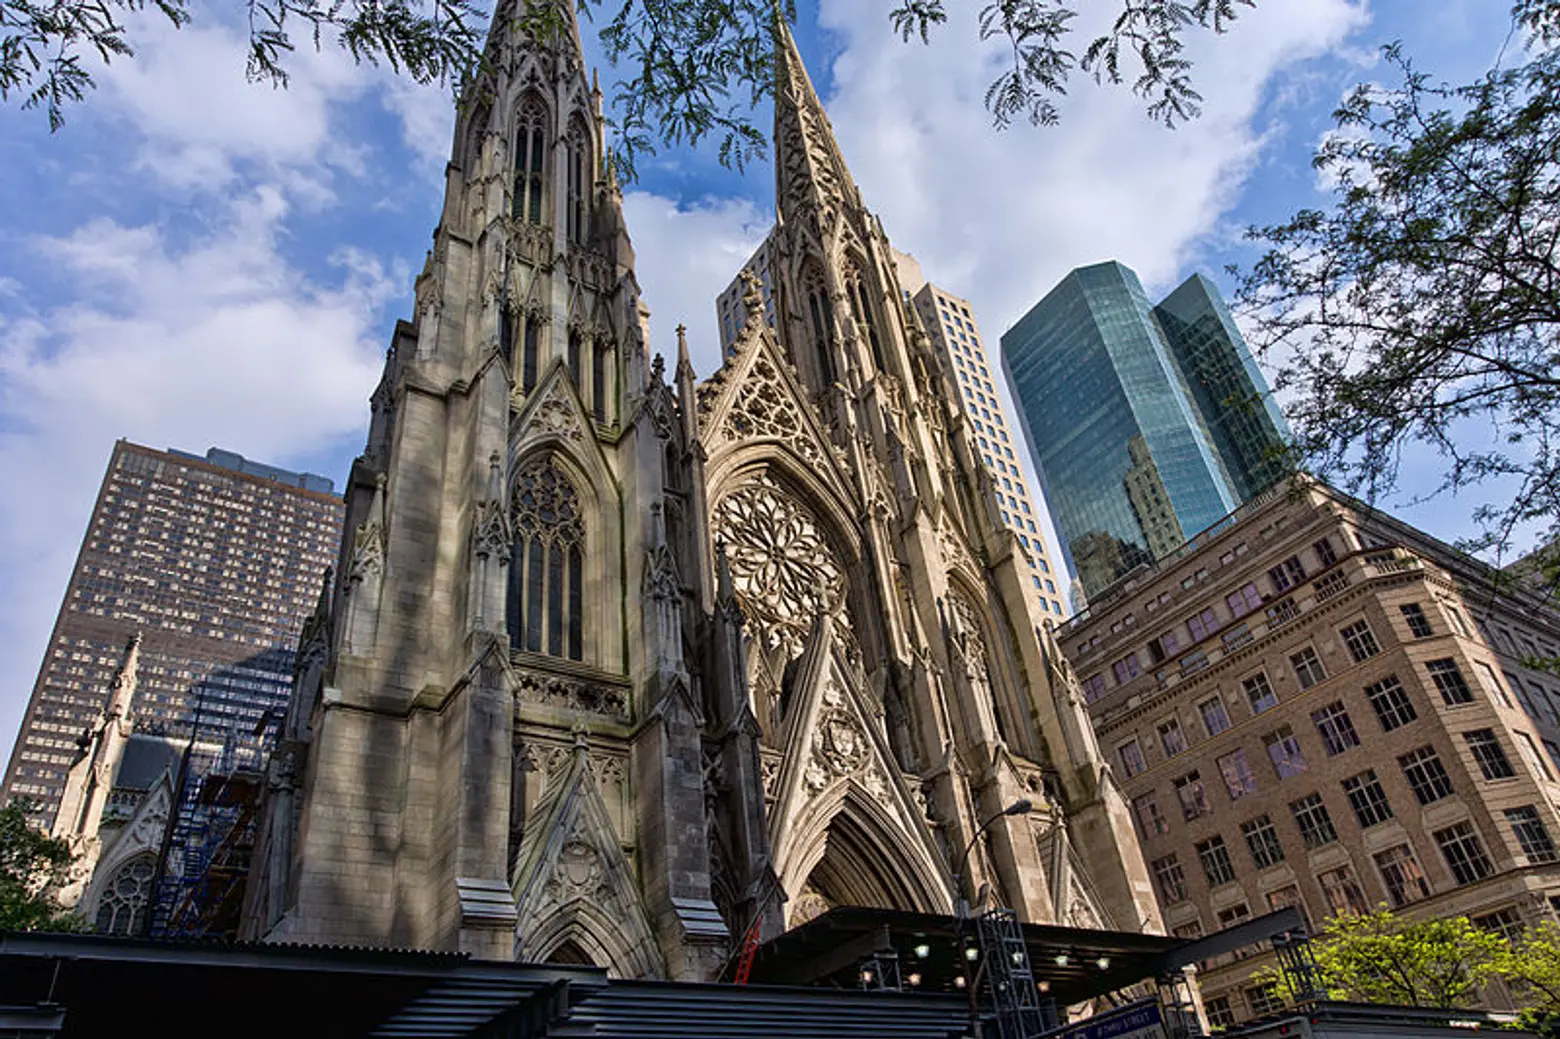 St. Patrick’s Cathedral to get $7.2M from sale of air rights under Midtown East rezoning